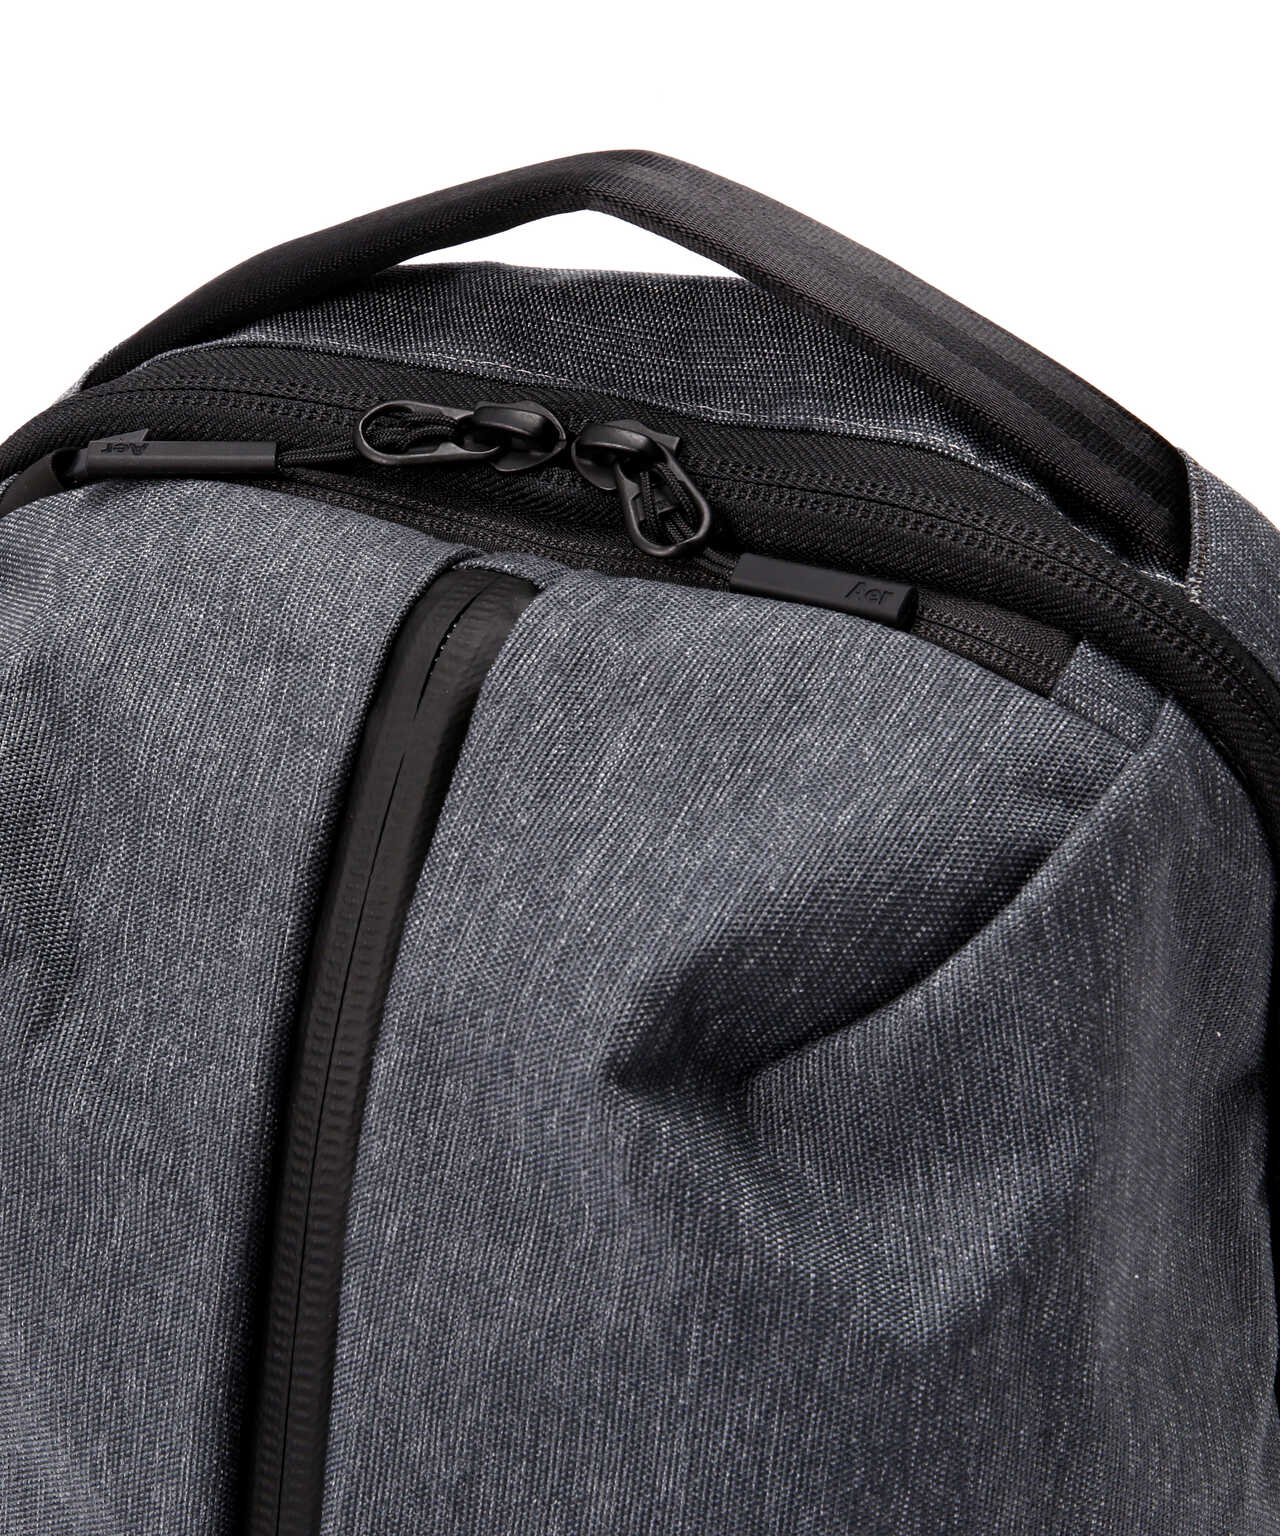 Aer（エアー）Fit Pack 3 Gray AER-12012